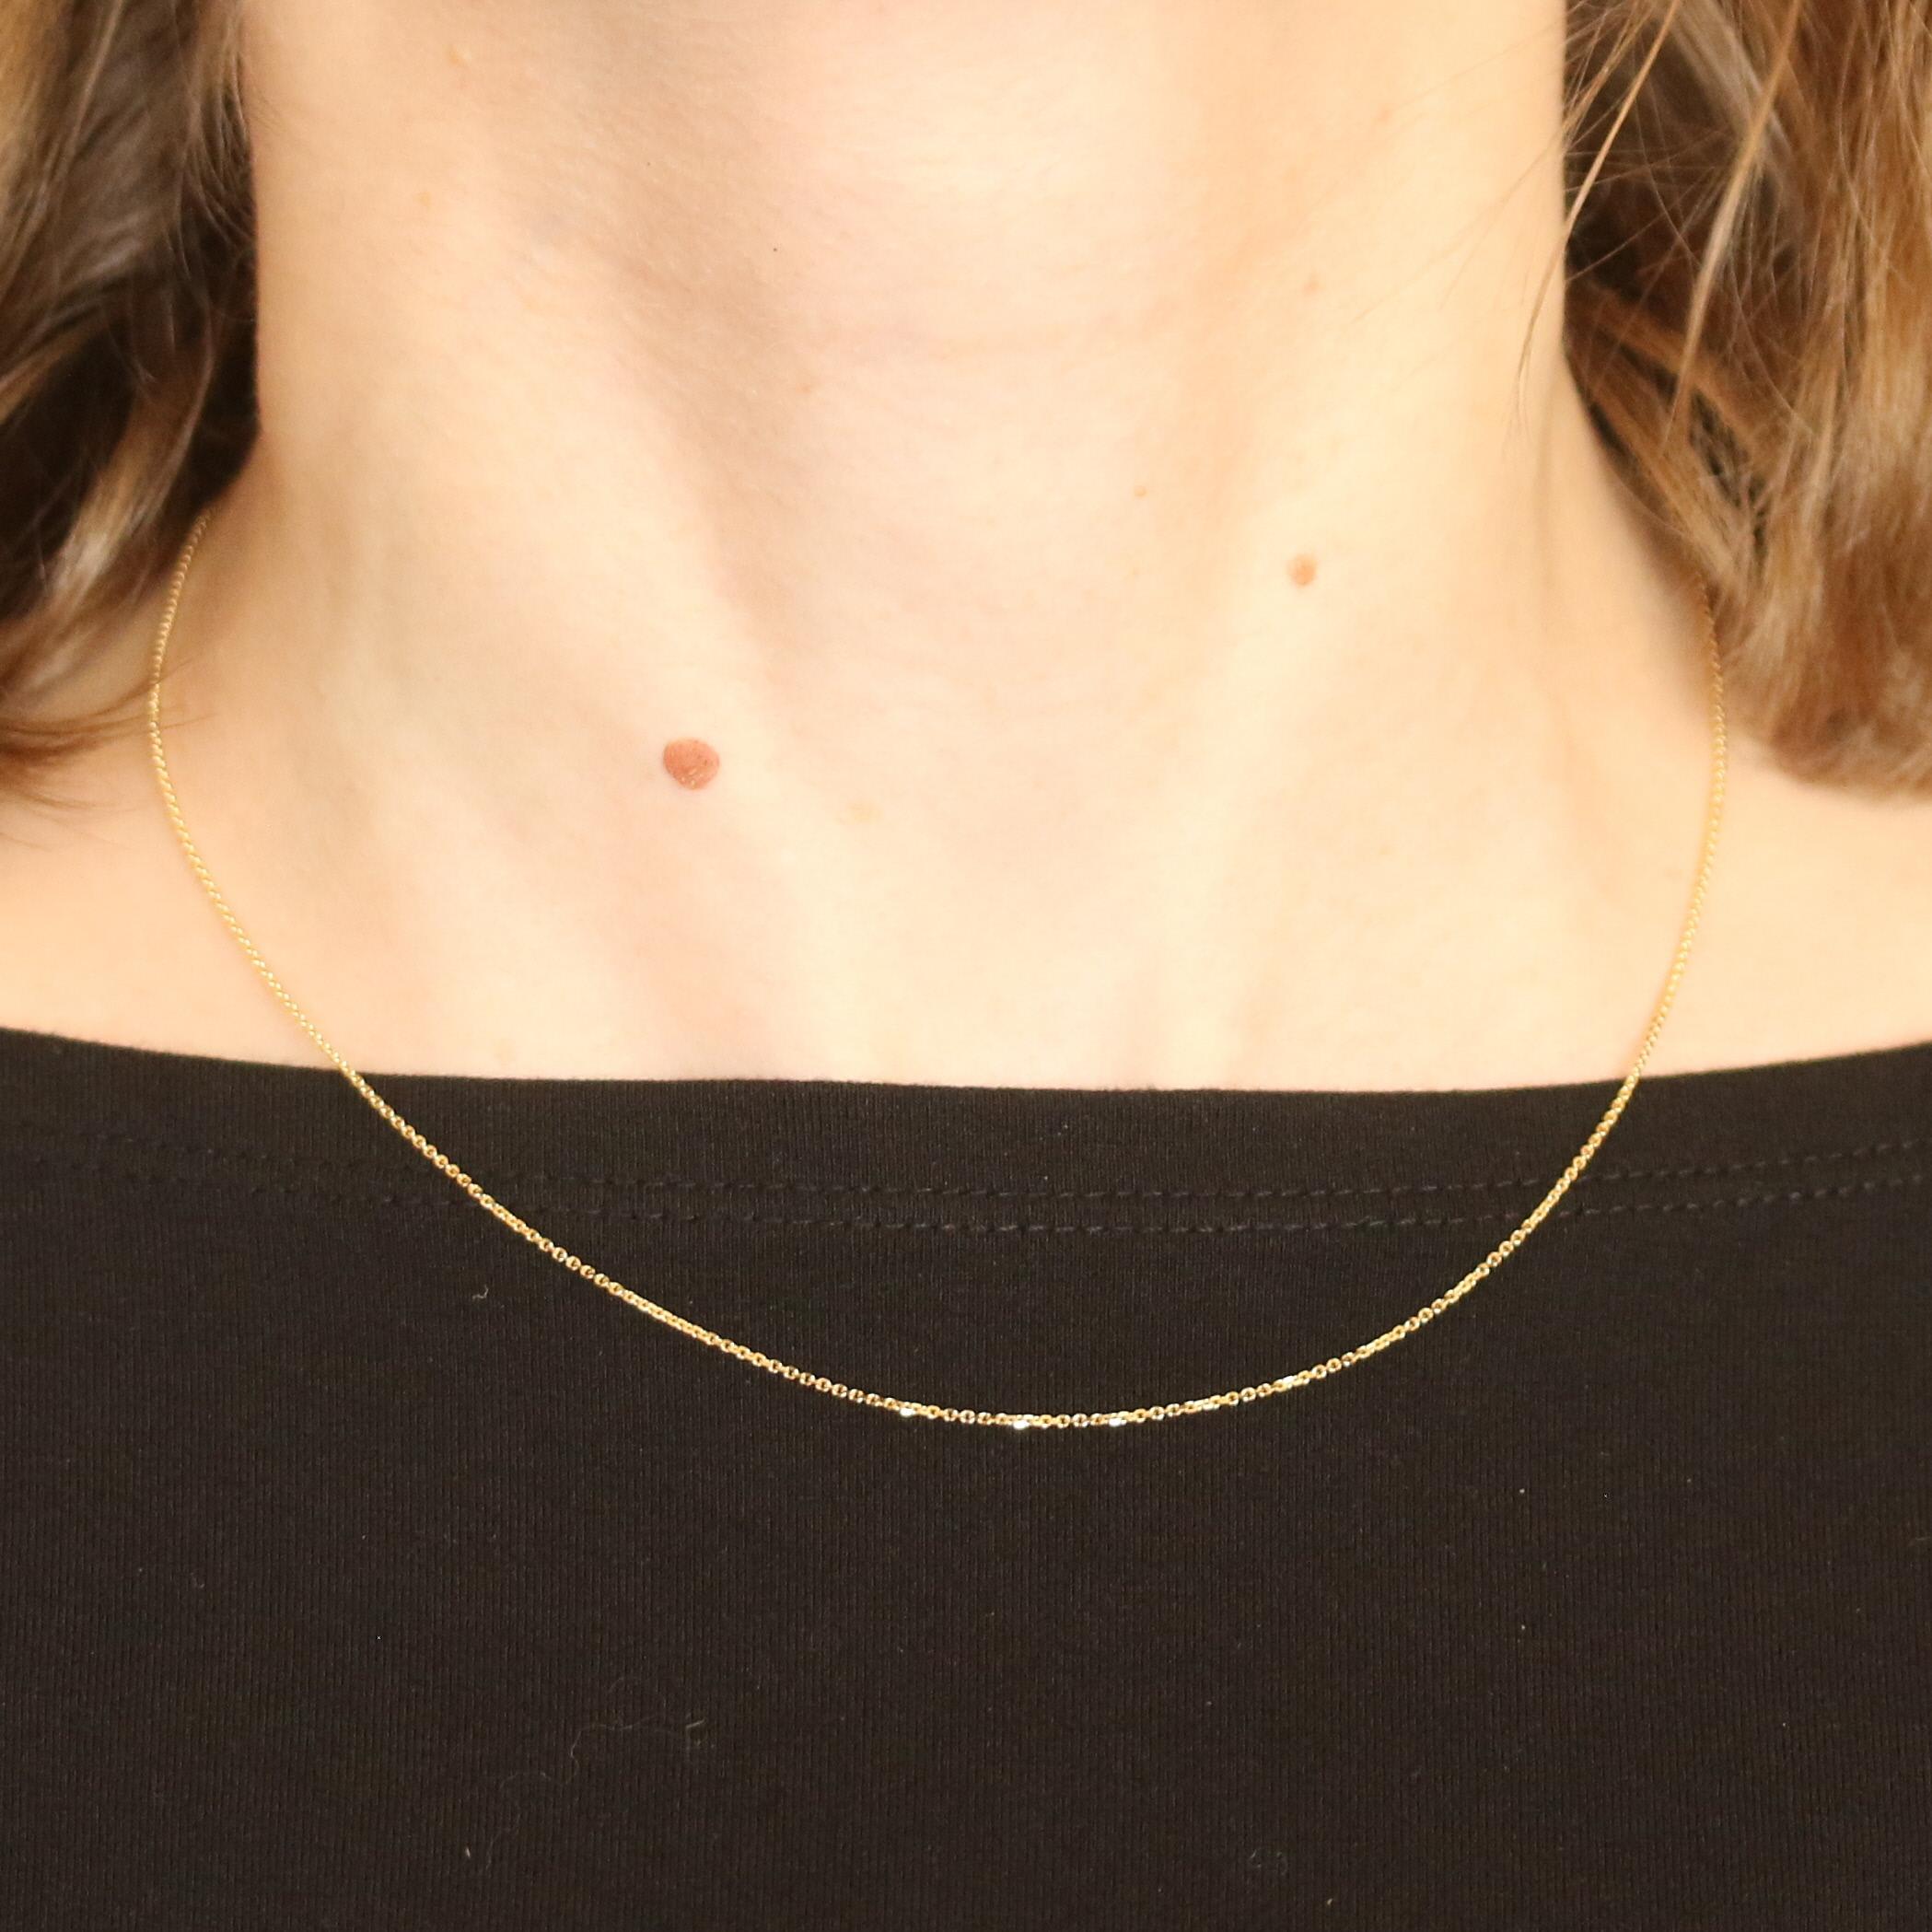 Metal Content: 14k Yellow Gold  

Chain Style: Diamond Cut Cable
Closure Type: Lobster Claw Clasp

Measurements: 
Length: 18